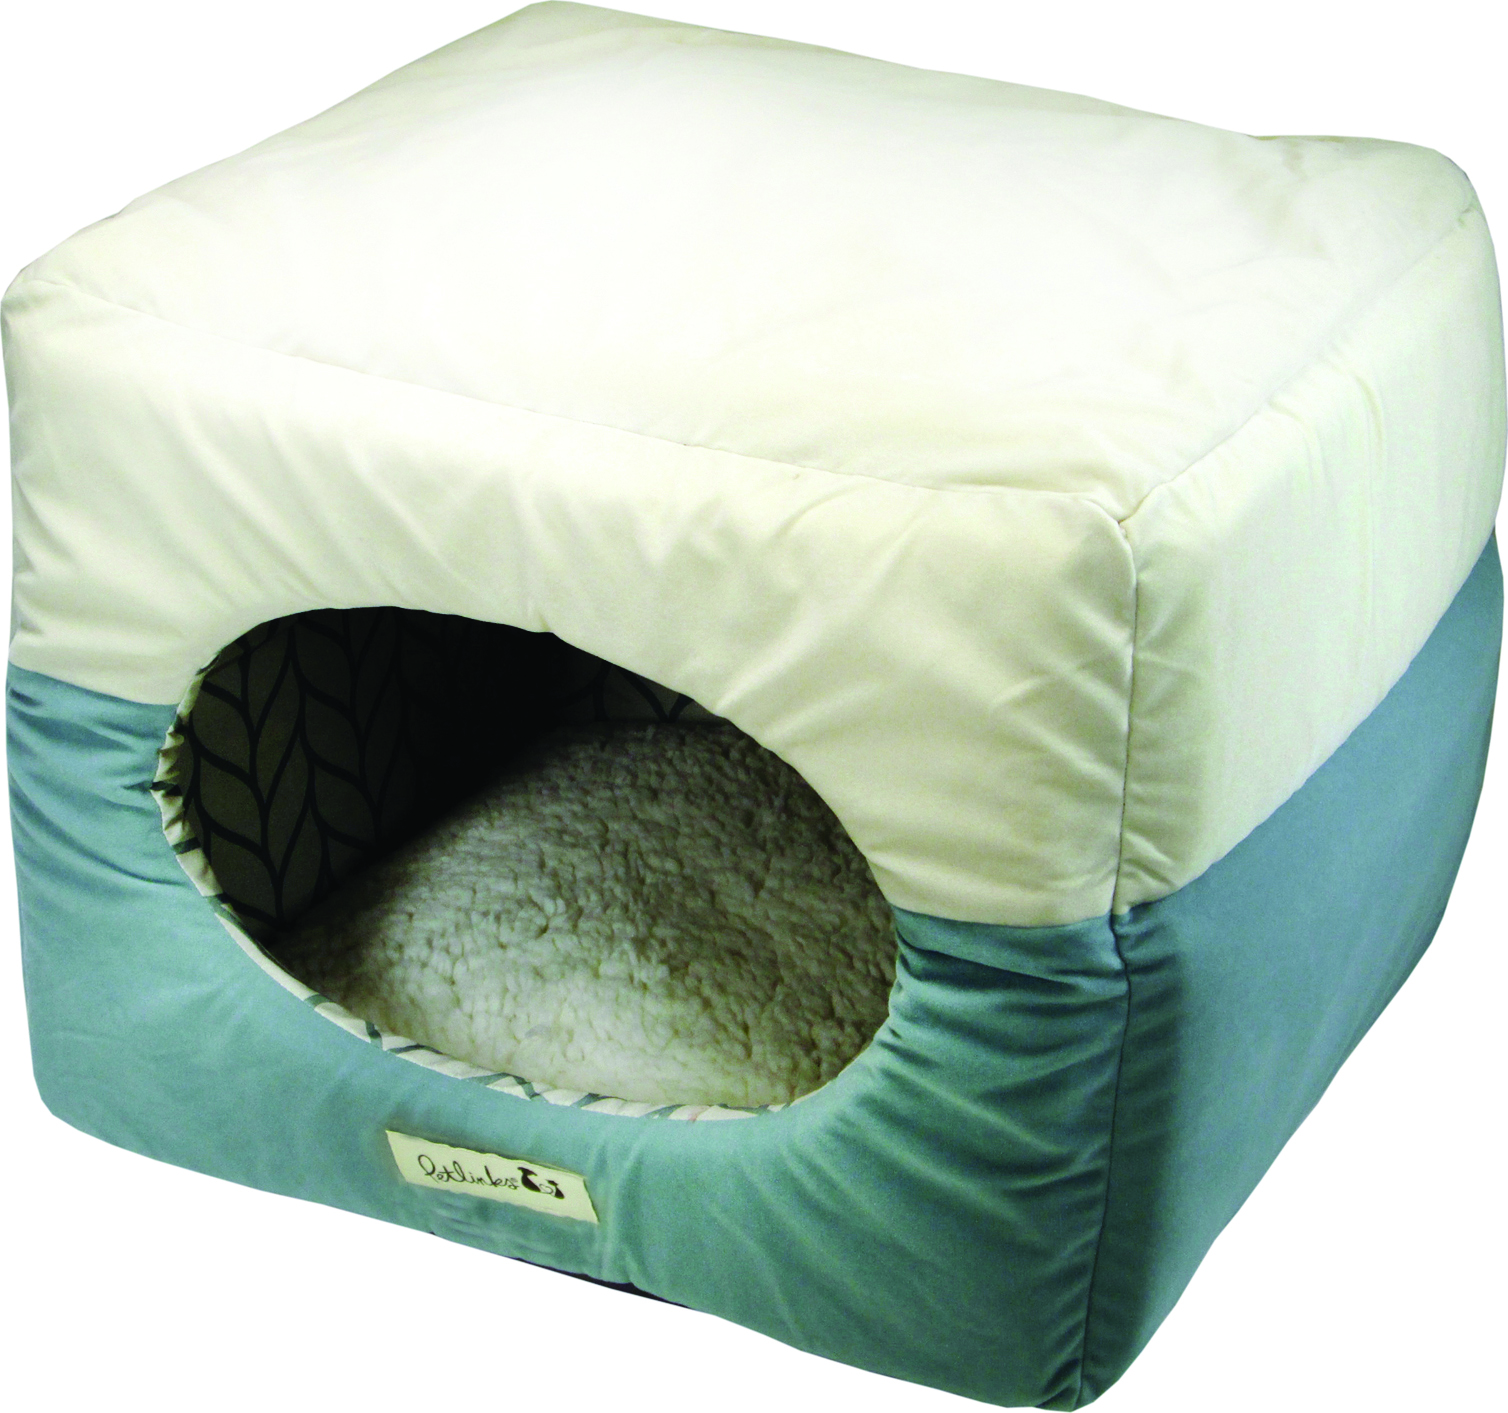 DOUBLE DREAMER CAT BED